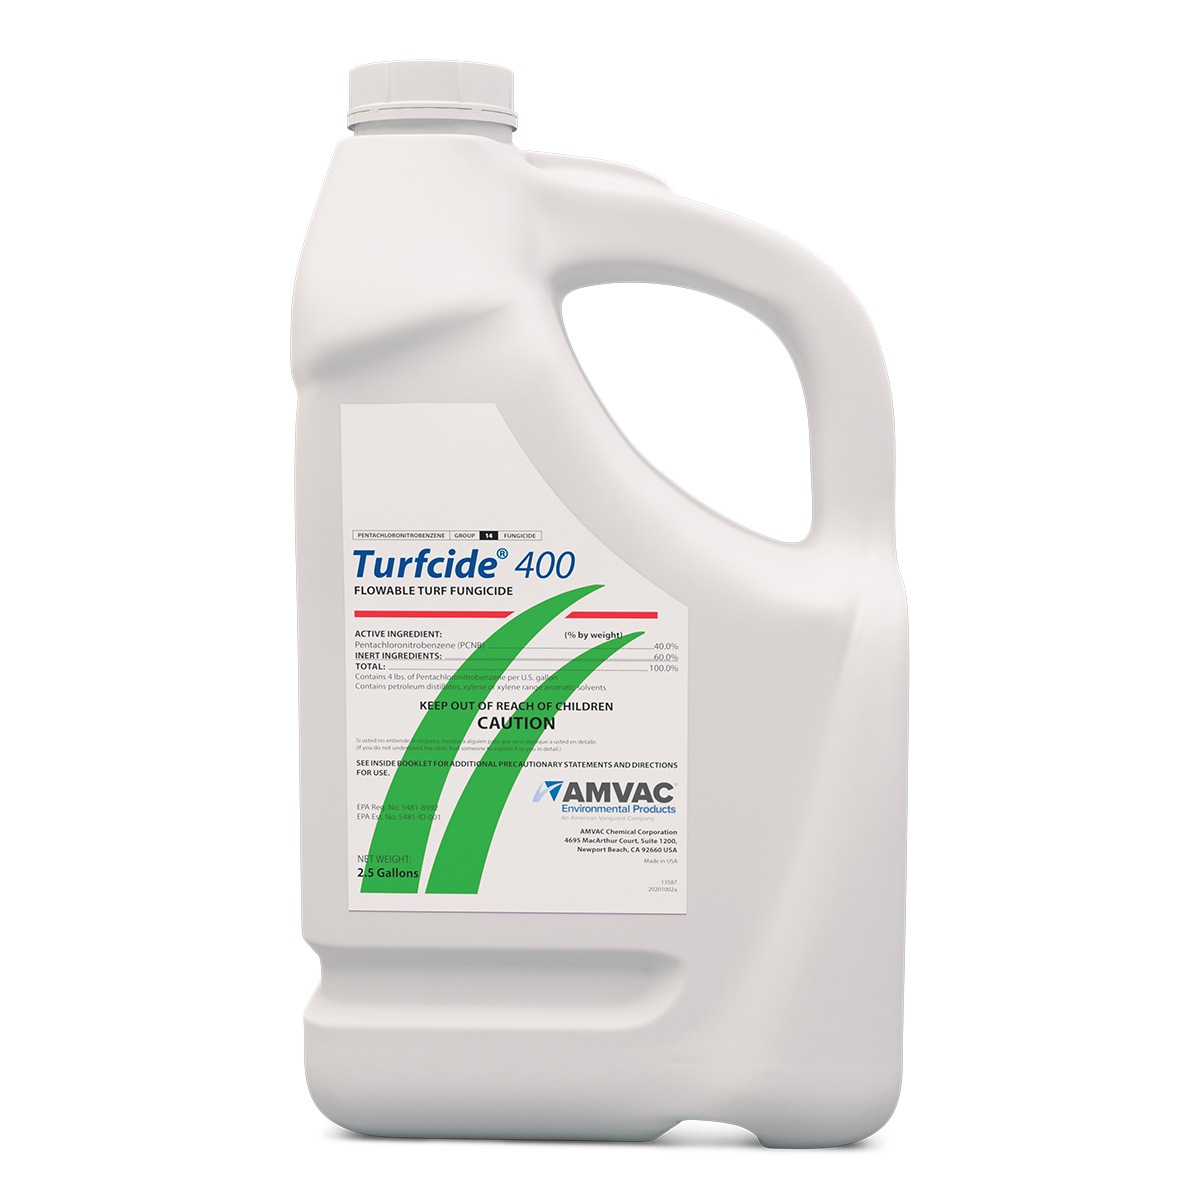 Turfcide 400 product package